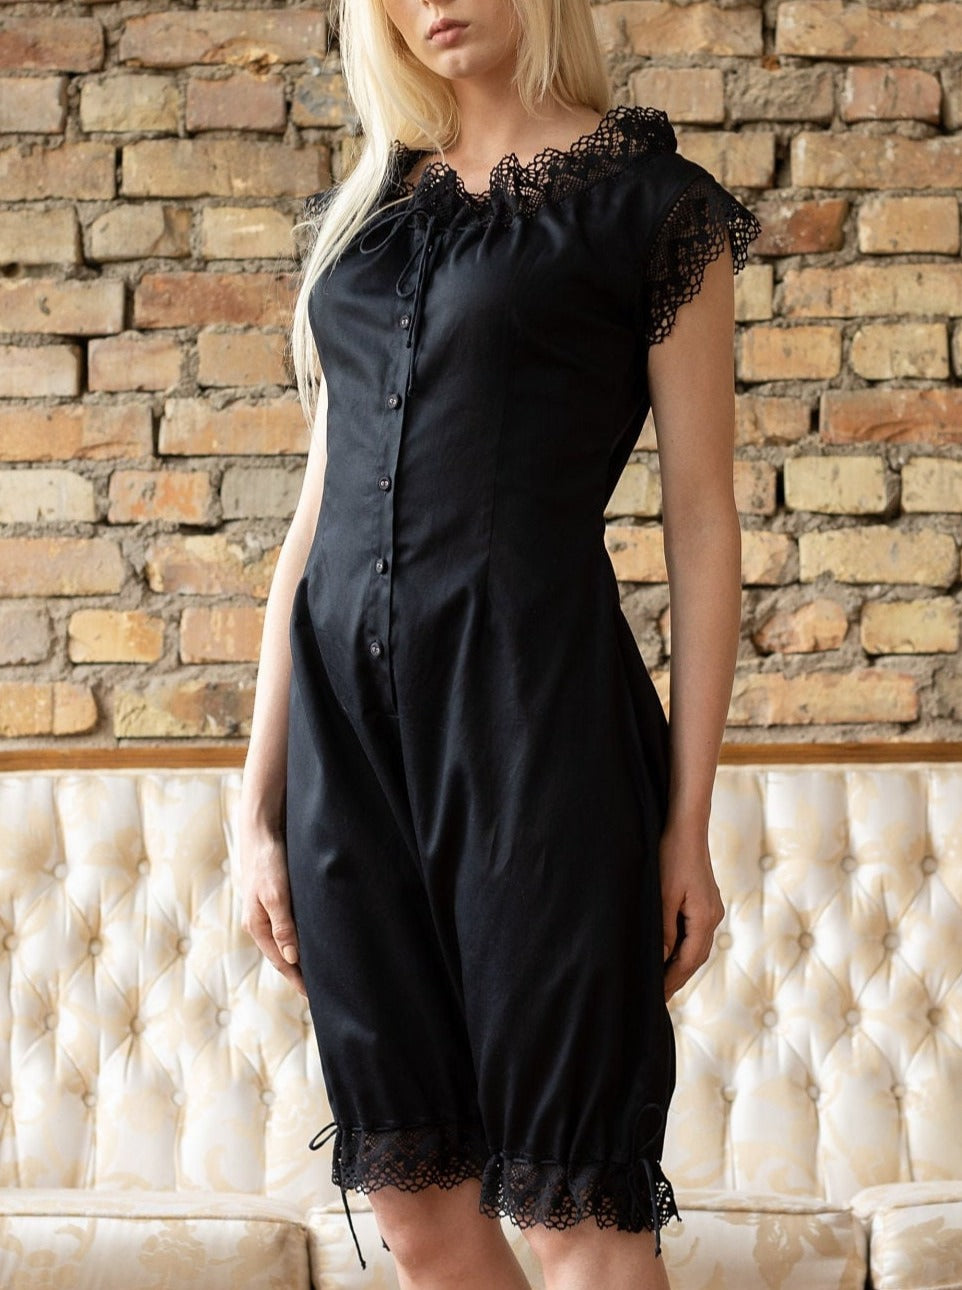 Baroness of the Dawn - Victorian Inspired Onesie in Black Cotton